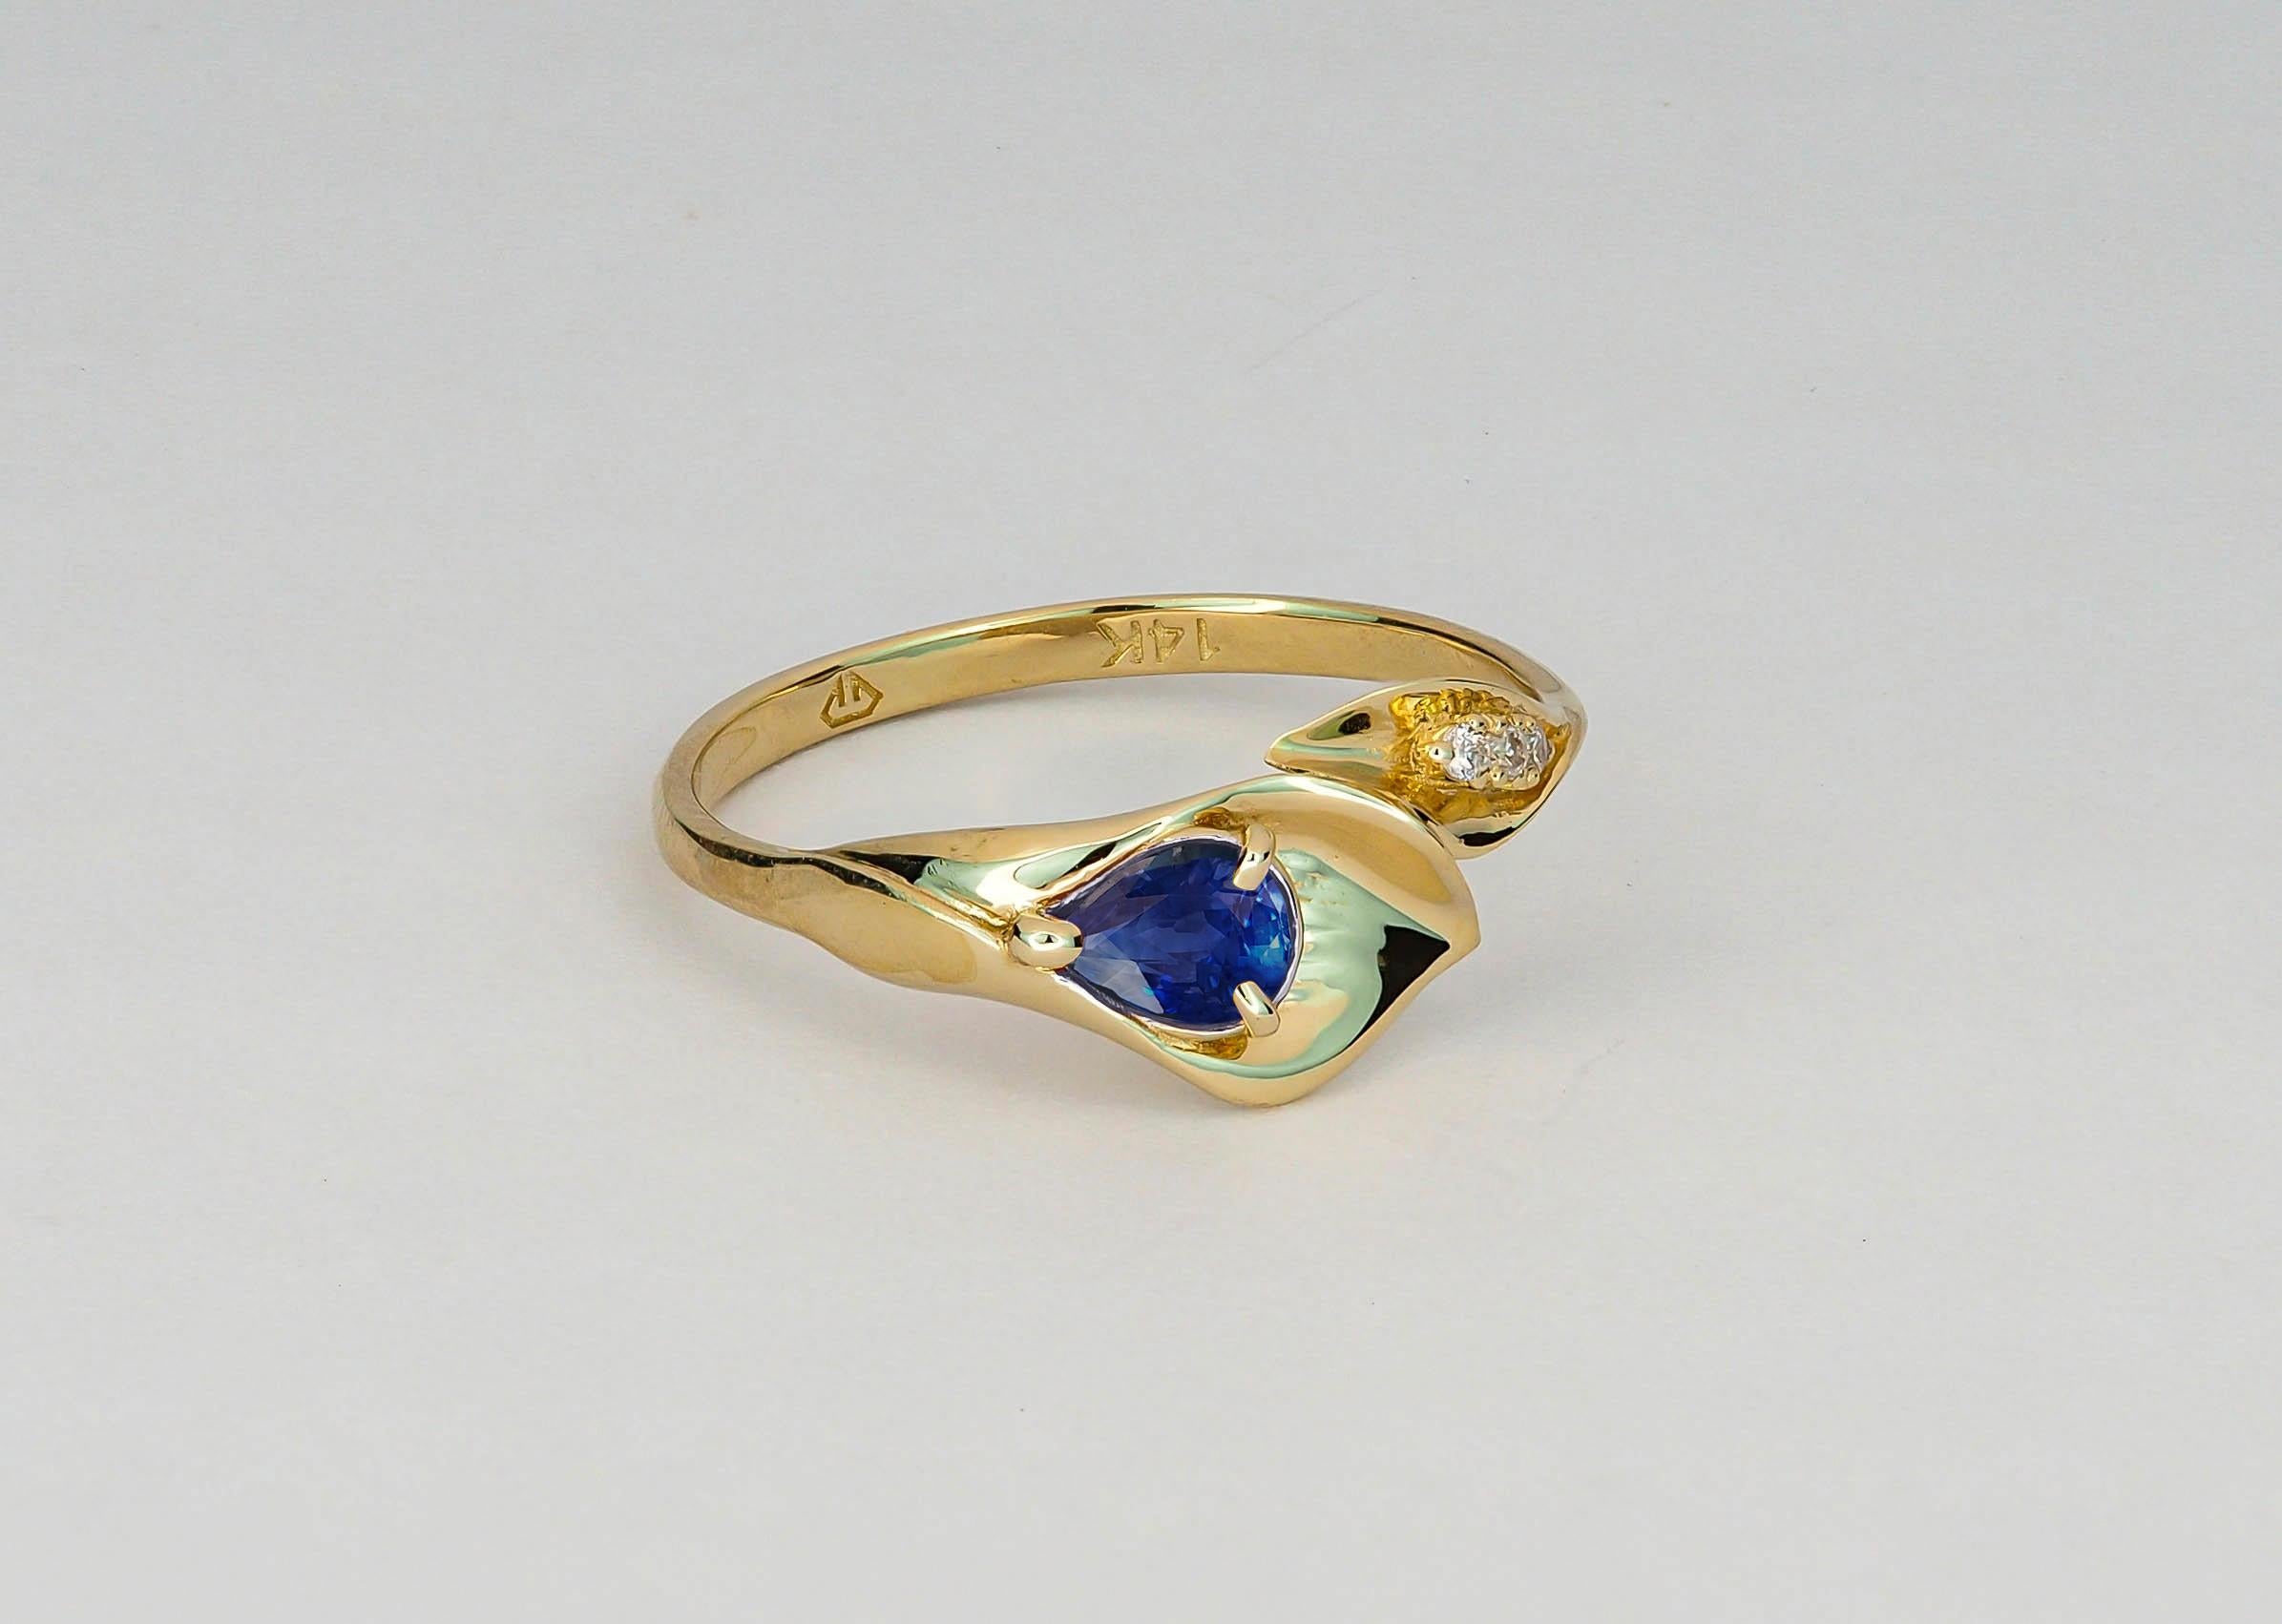 Lily calla gold ring. 14 kt  gold ring with sapphire and diamonds. Pear sapphire gold ring. Flower gold ring.Genuine sapphire ring. Blue sapphire ring. Sapphire vintage ring. Delicate sapphire ring. Sapphire ring for woman.Natural sapphire